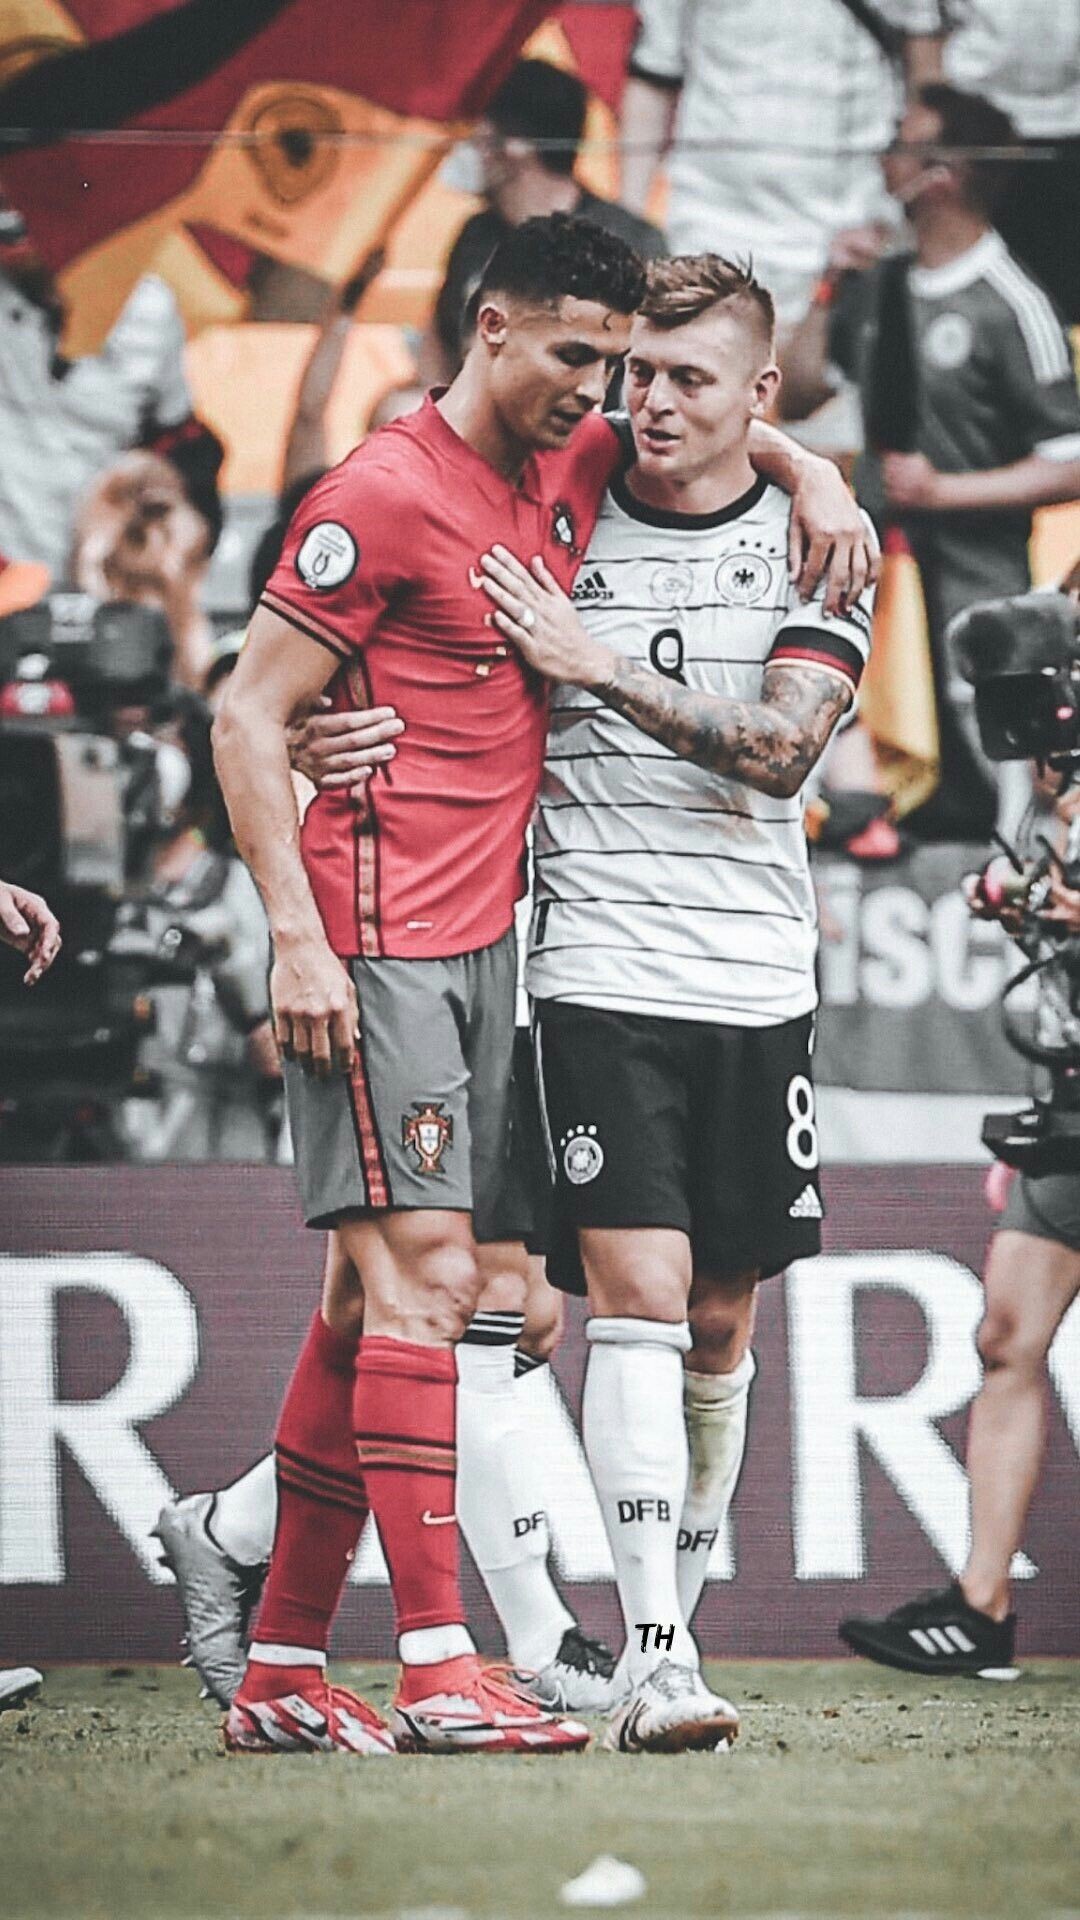 Germany Soccer Team: Toni Kroos and Cristiano Ronaldo, Germany's 4-2 Euro 2020 win over Portugal. 1080x1920 Full HD Wallpaper.